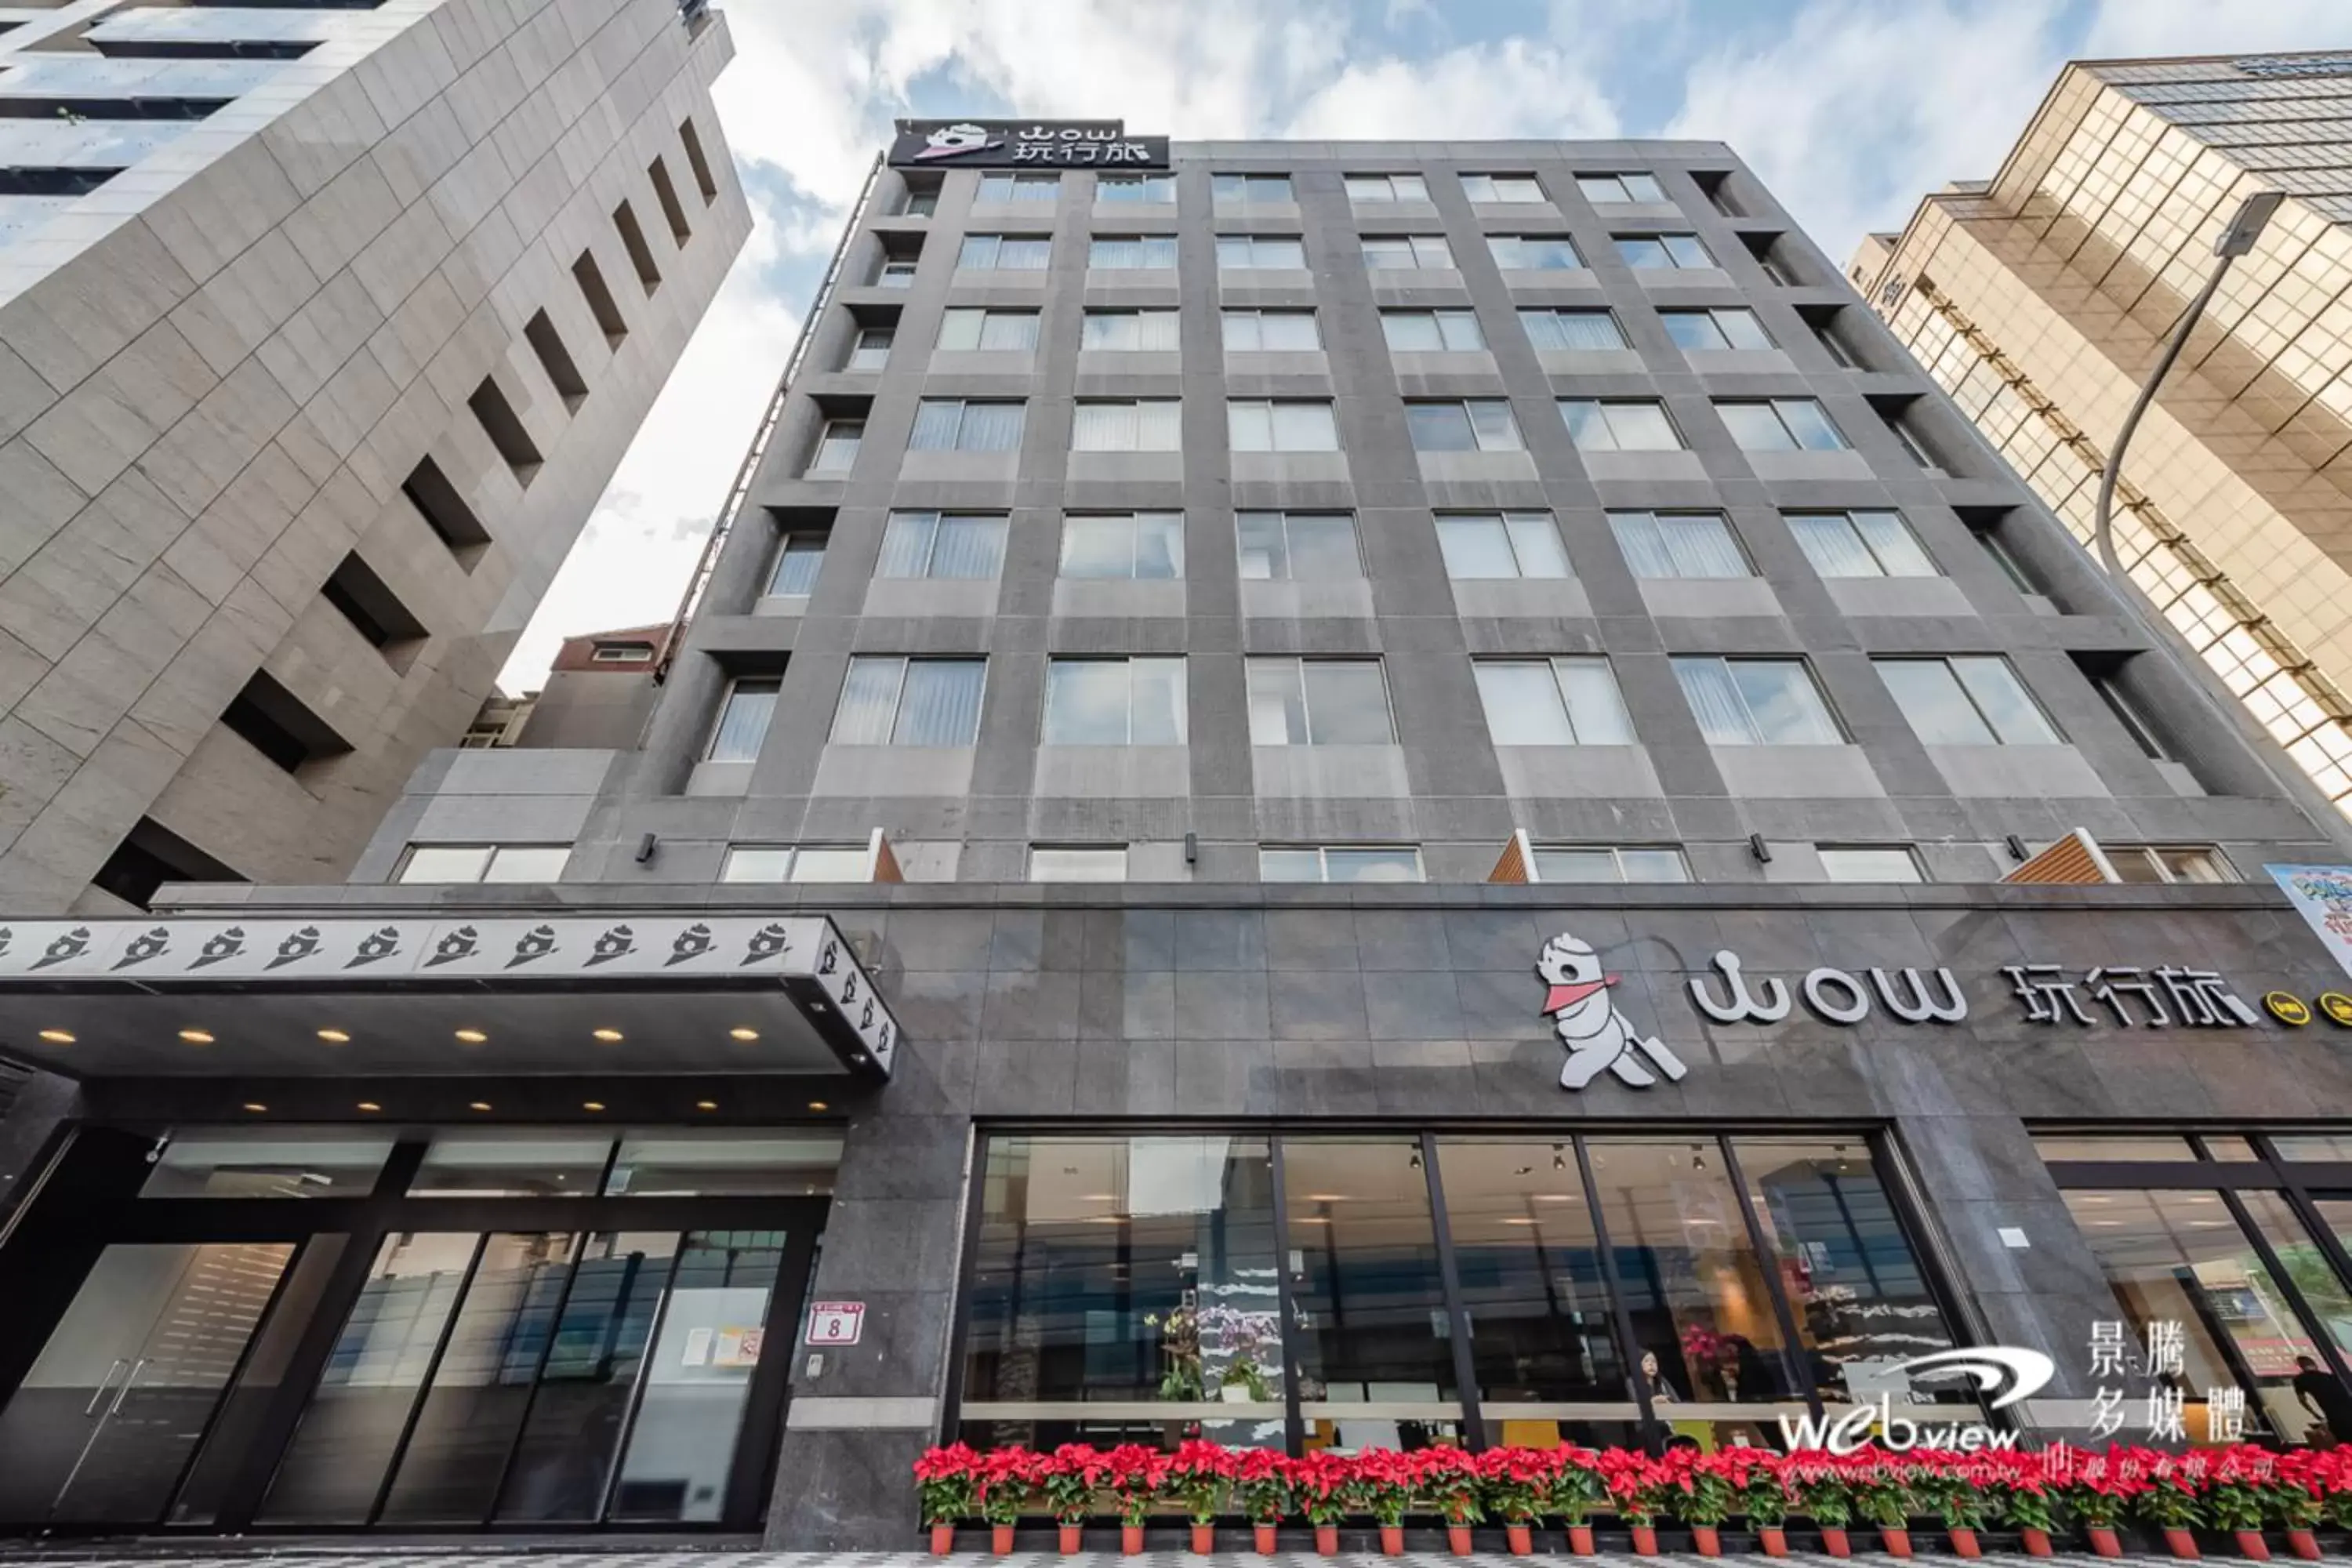 Property Building in Wow Happy- Taipei